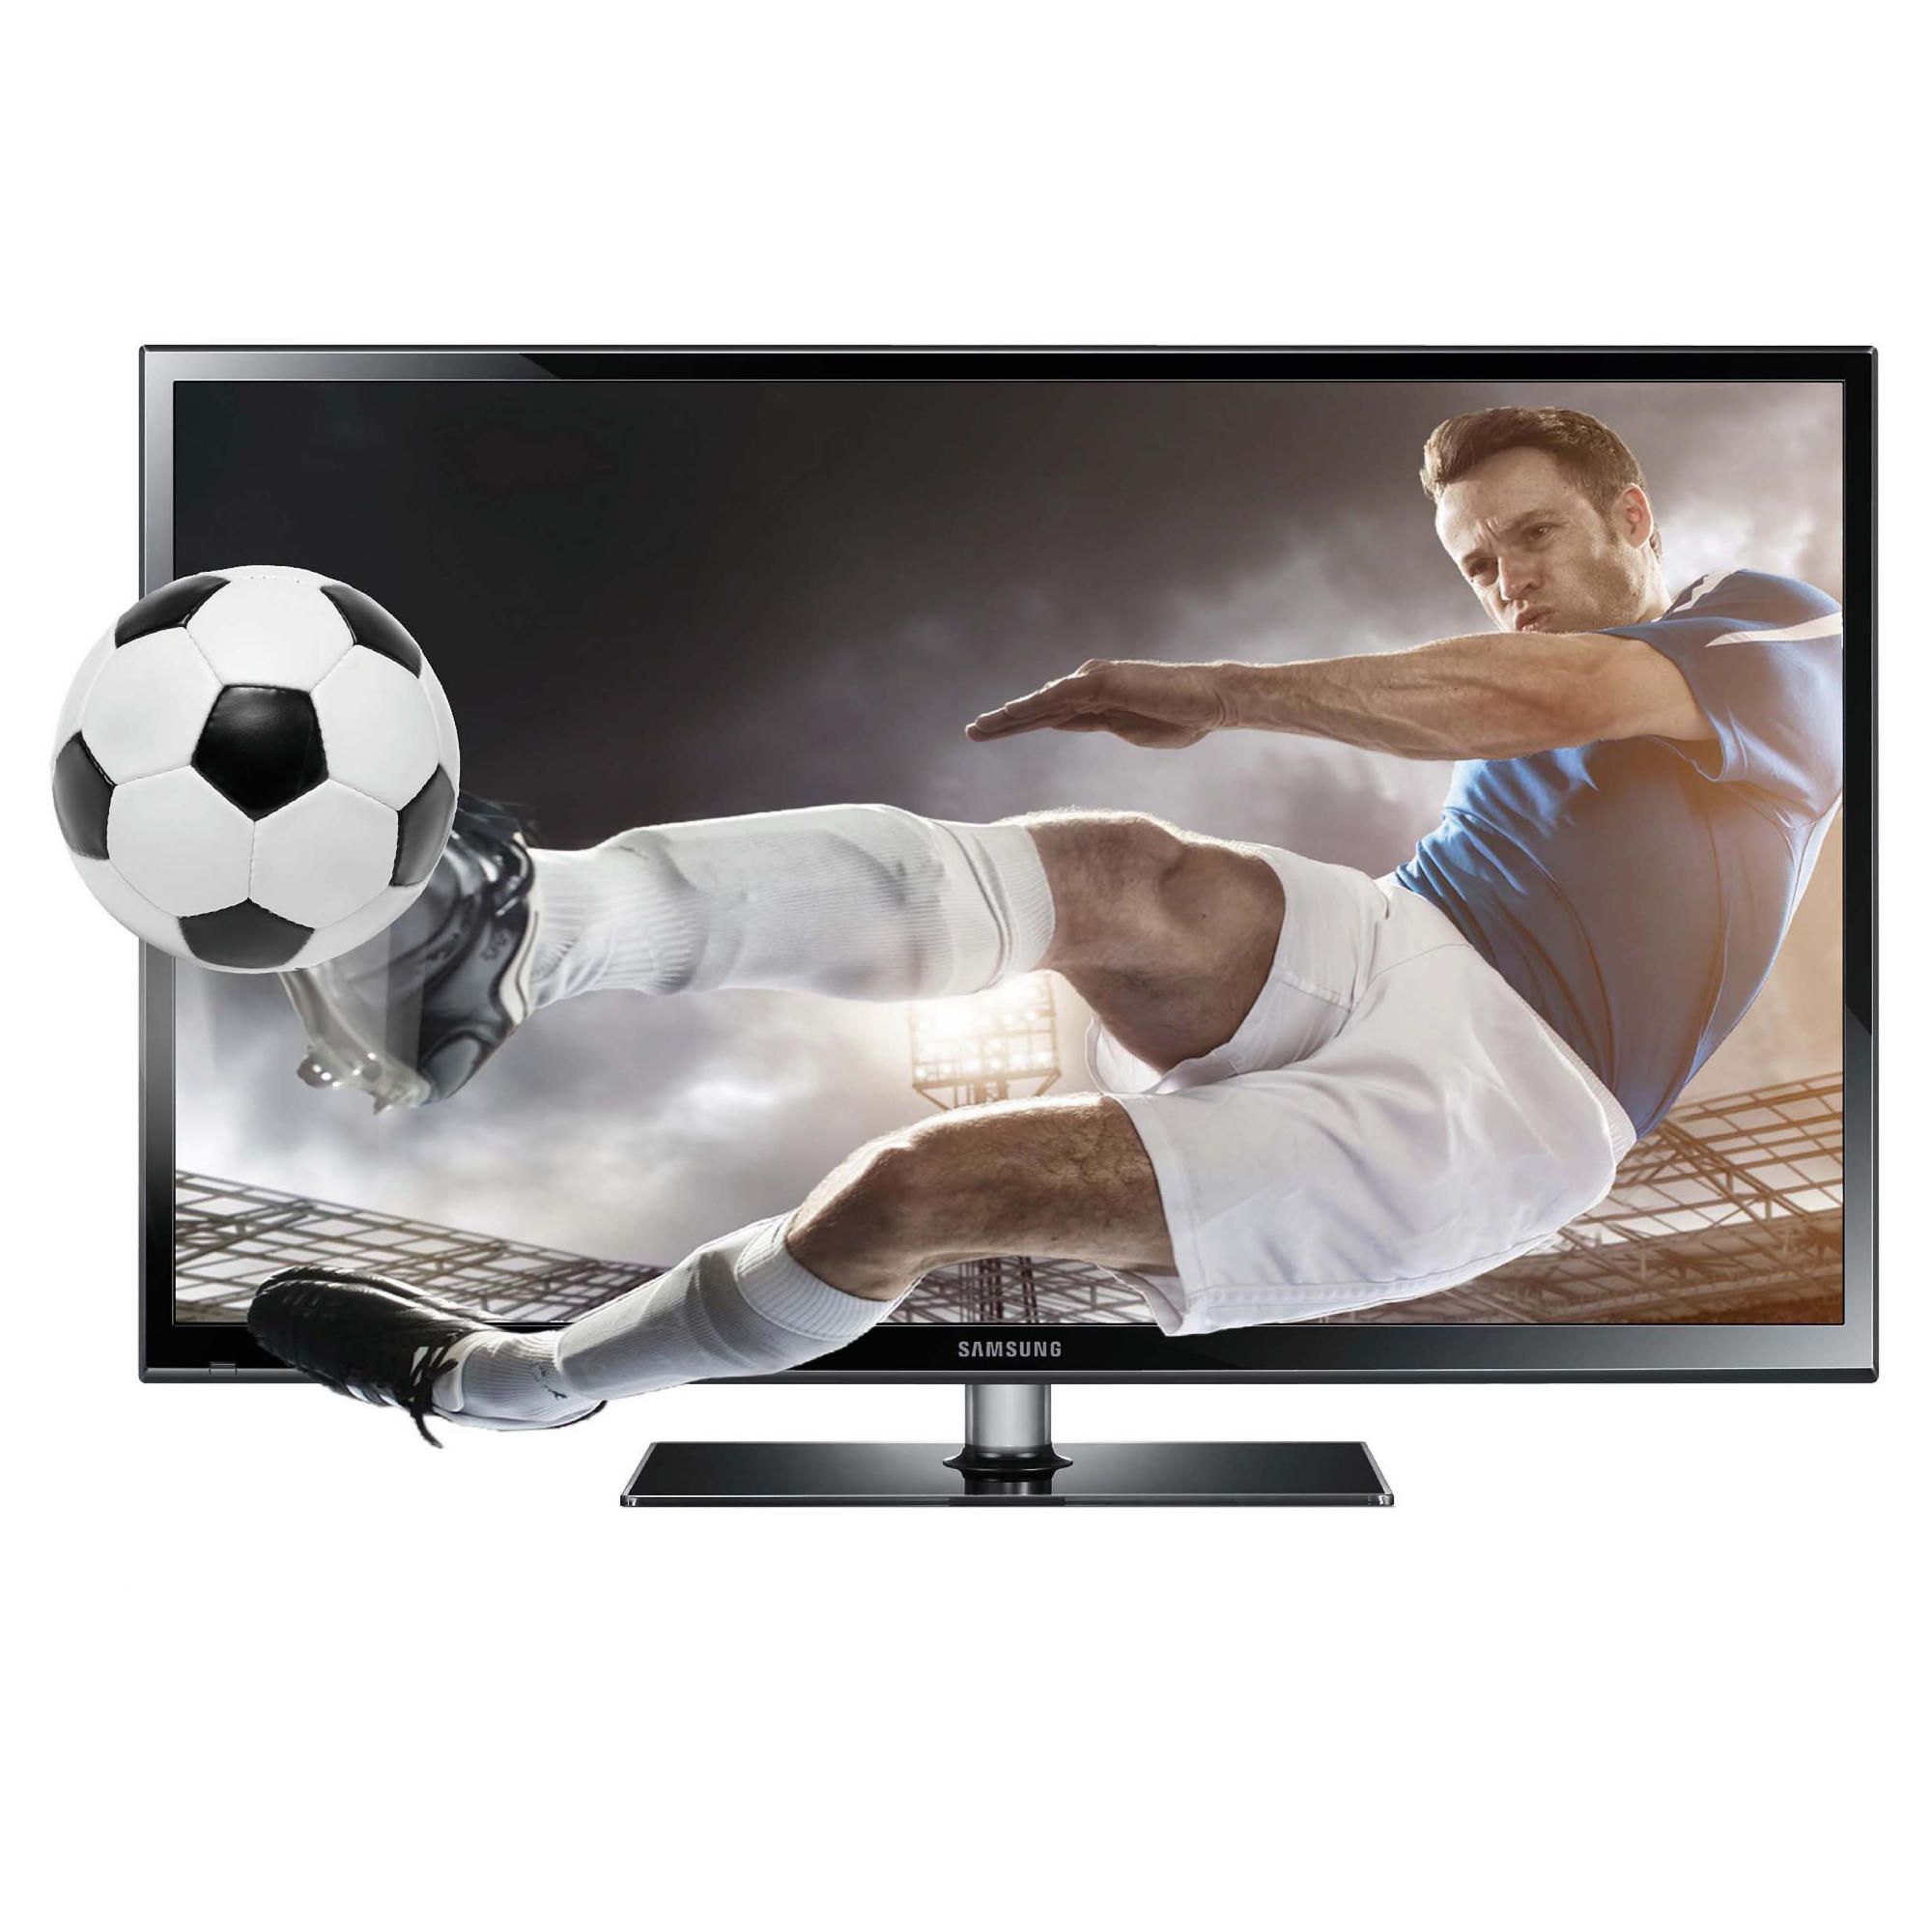 Samsung PS51F4900 51 Inch HD Ready 720p 3D Plasma TV with Freeview HD